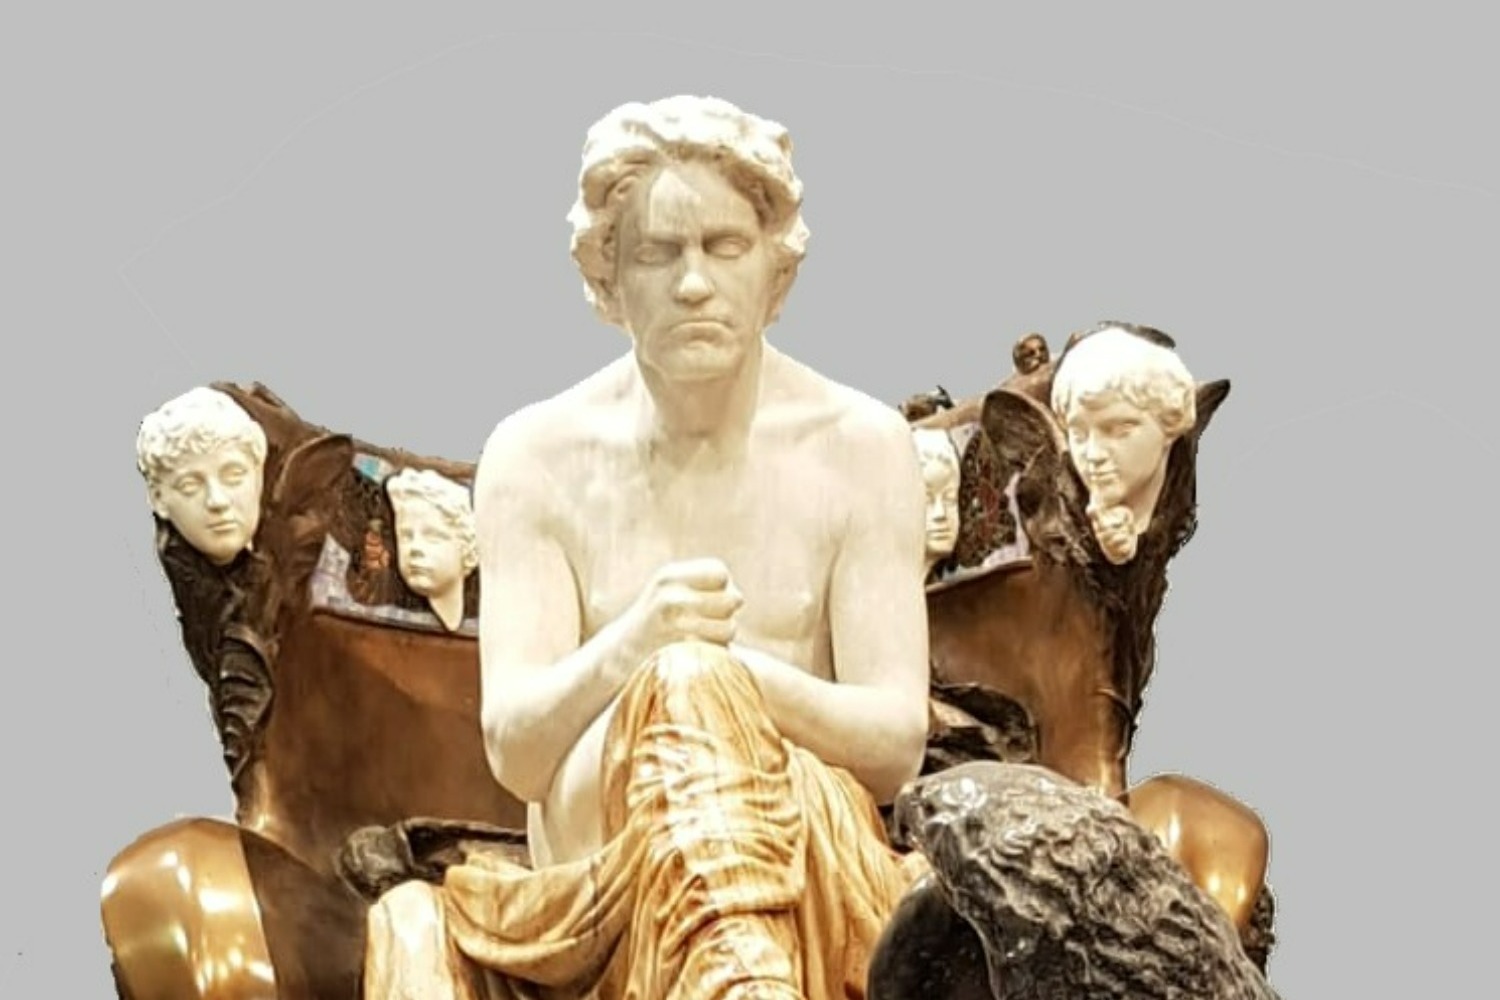 Agrand statue of Beethoven as a classical hero seats him on a throne on a dias.